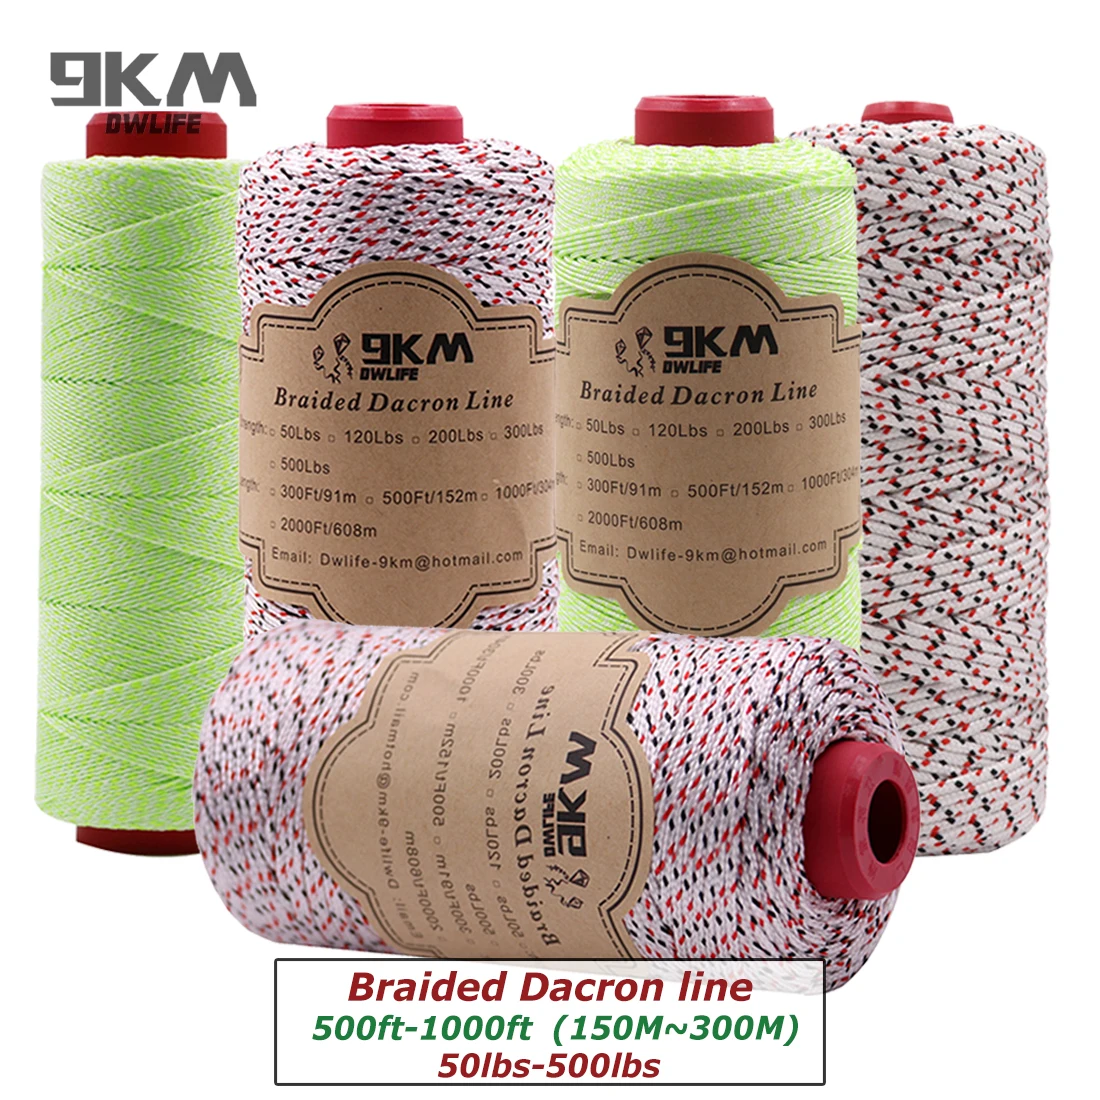 Braided Dacron Fishing Line Outdoor Kite Line 500-1000ft Multi-Functional Camping Flag Tying Band Fishing Applications 50-500Lbs